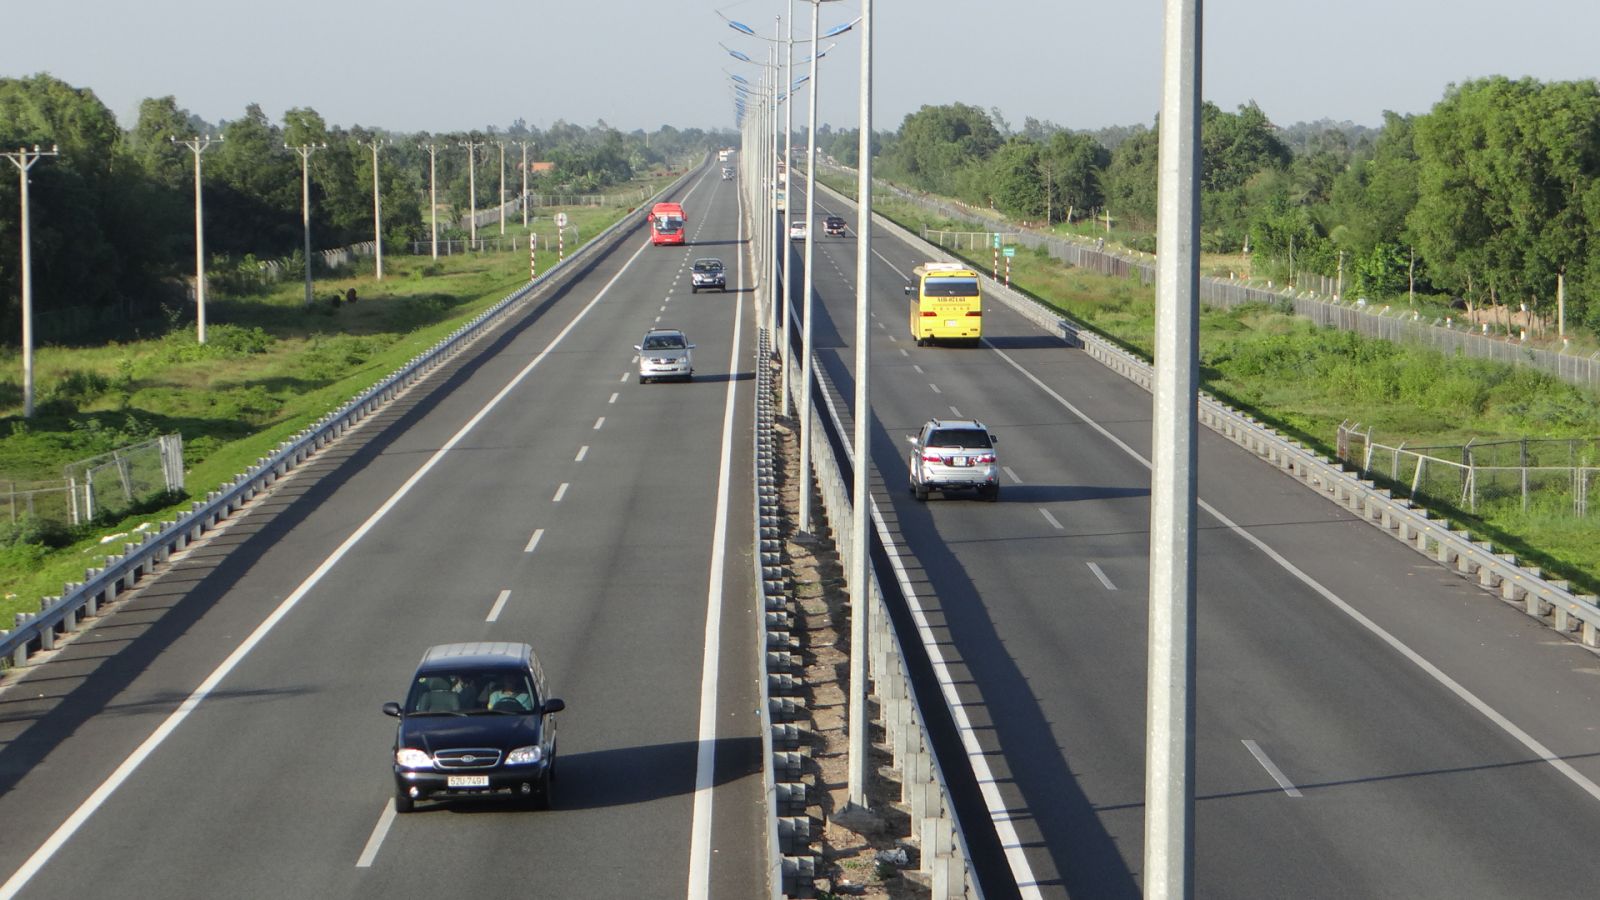 With a total length of 654km, North-South expressway will go through 13 provinces across Vietnam. (Photo: Vneconomy)